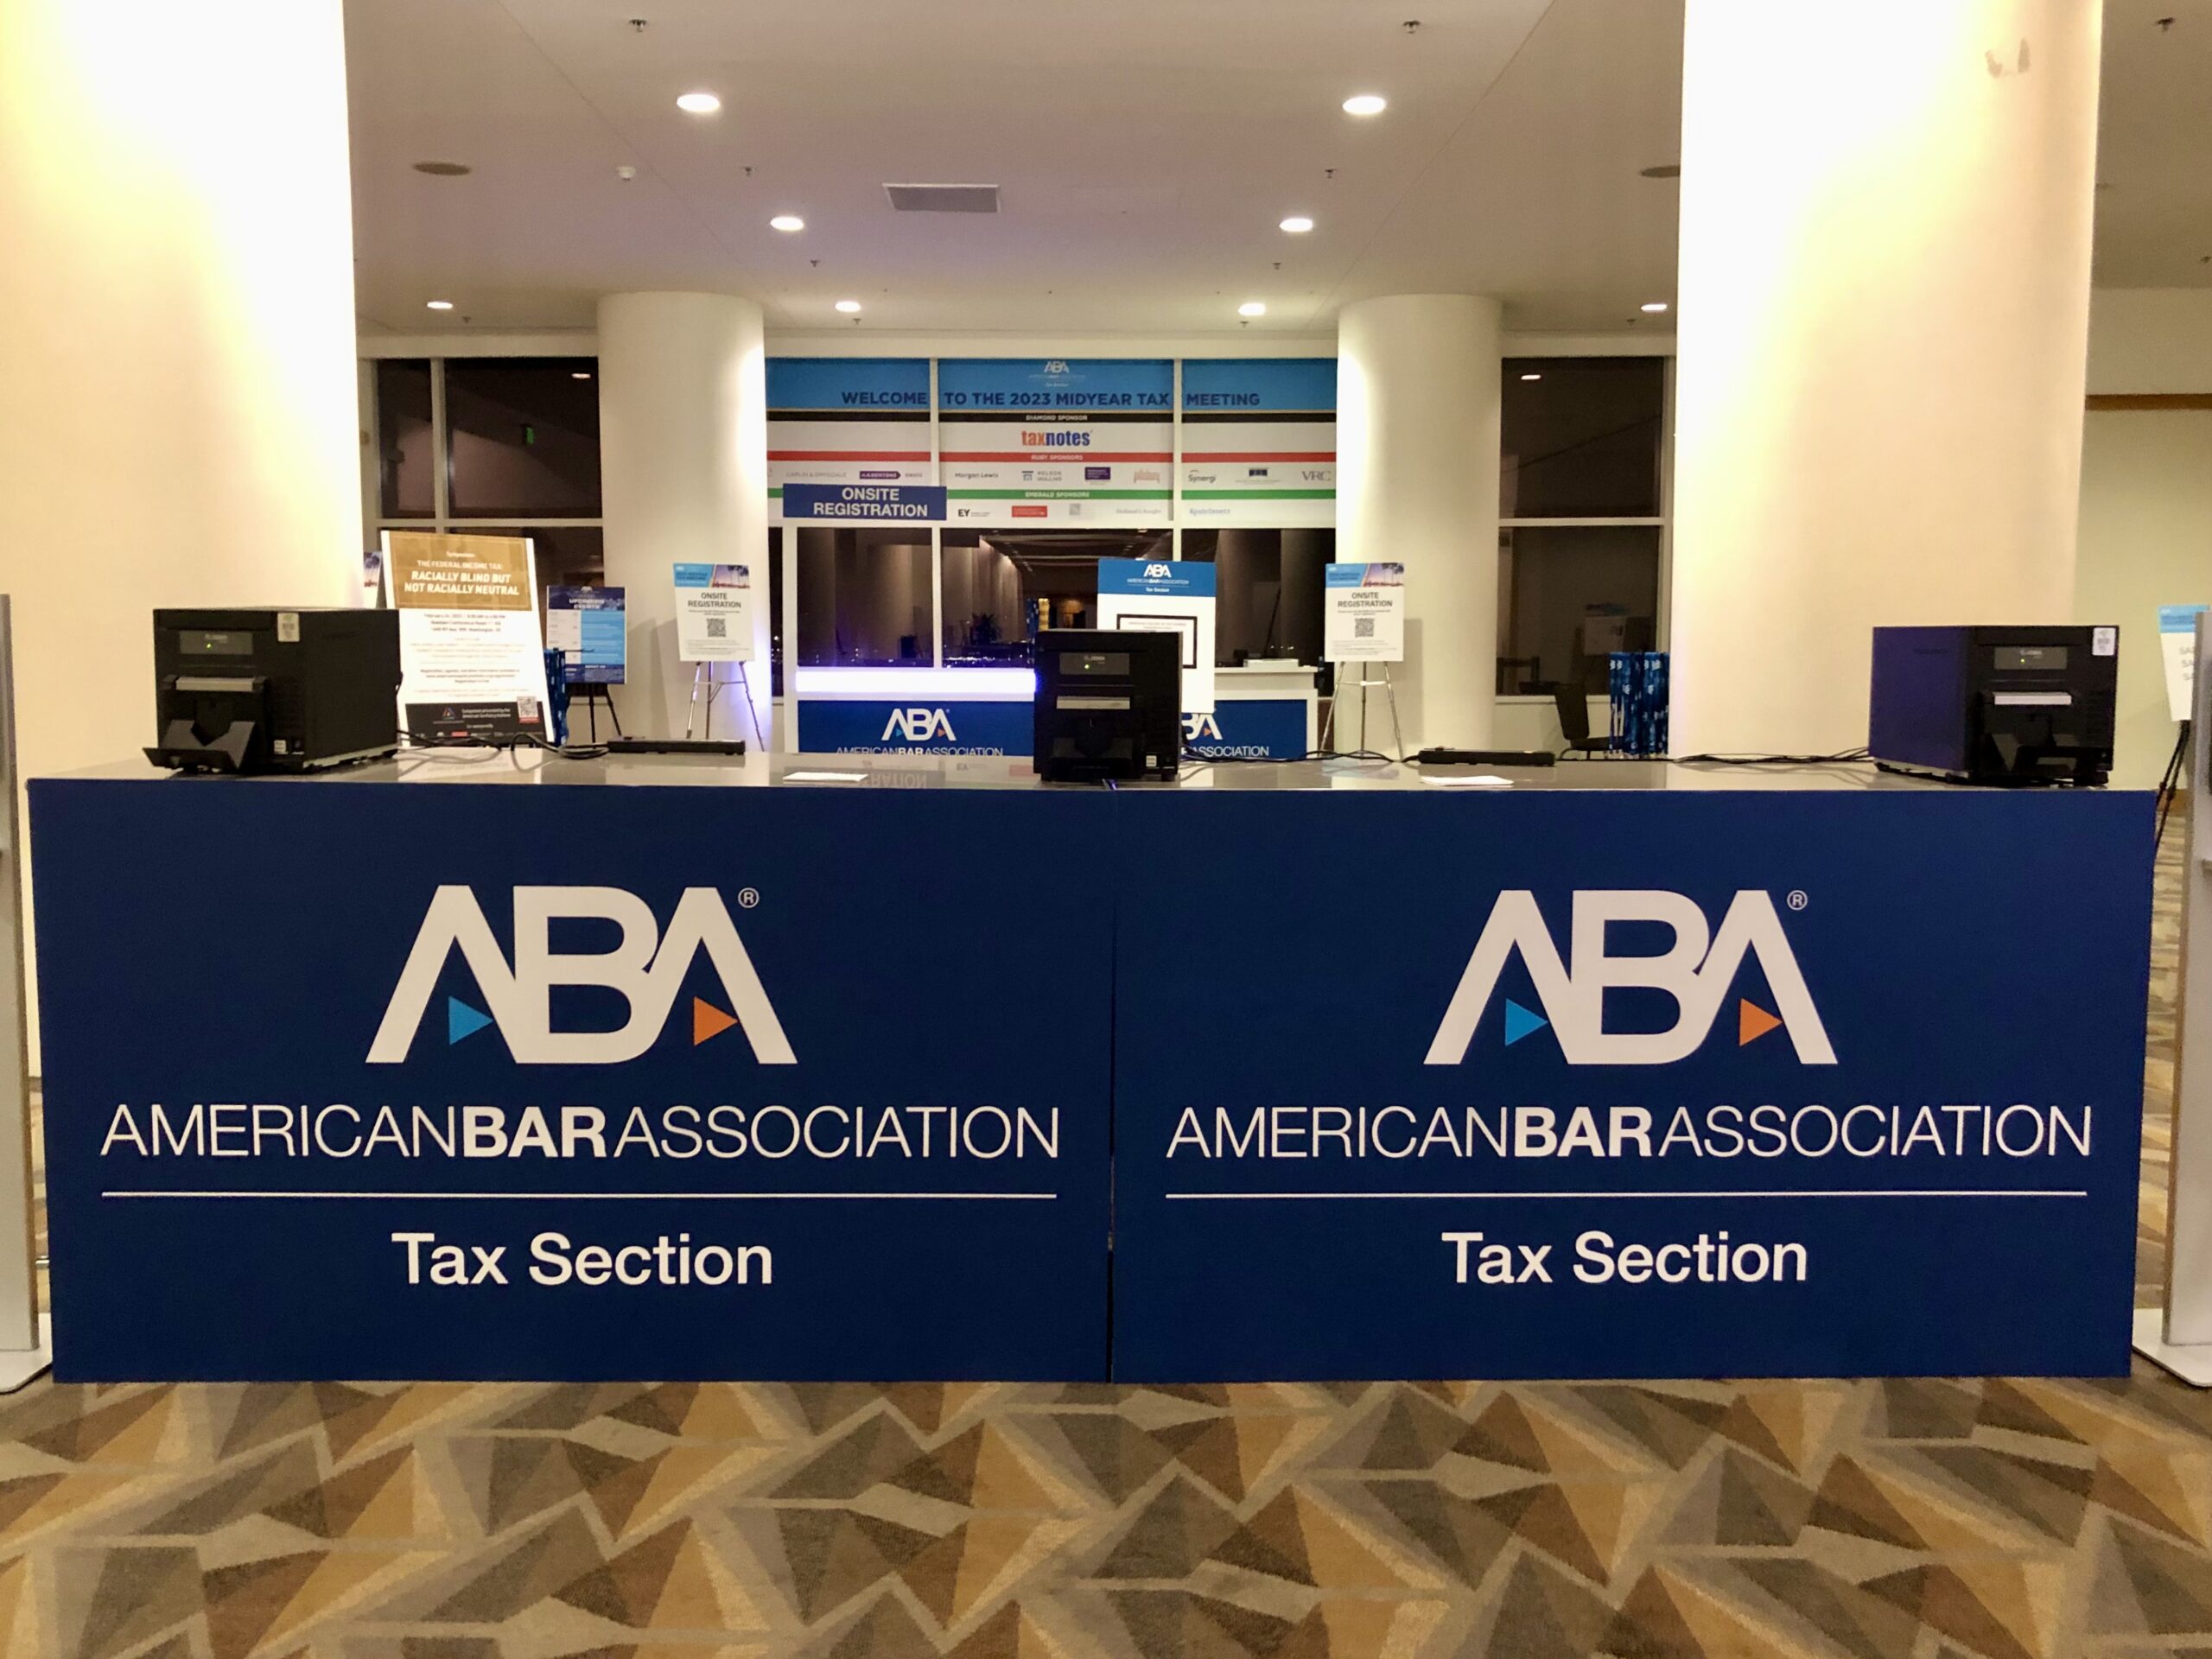 American Bar Association Tax Section tables at the Hilton San Diego Bayfront